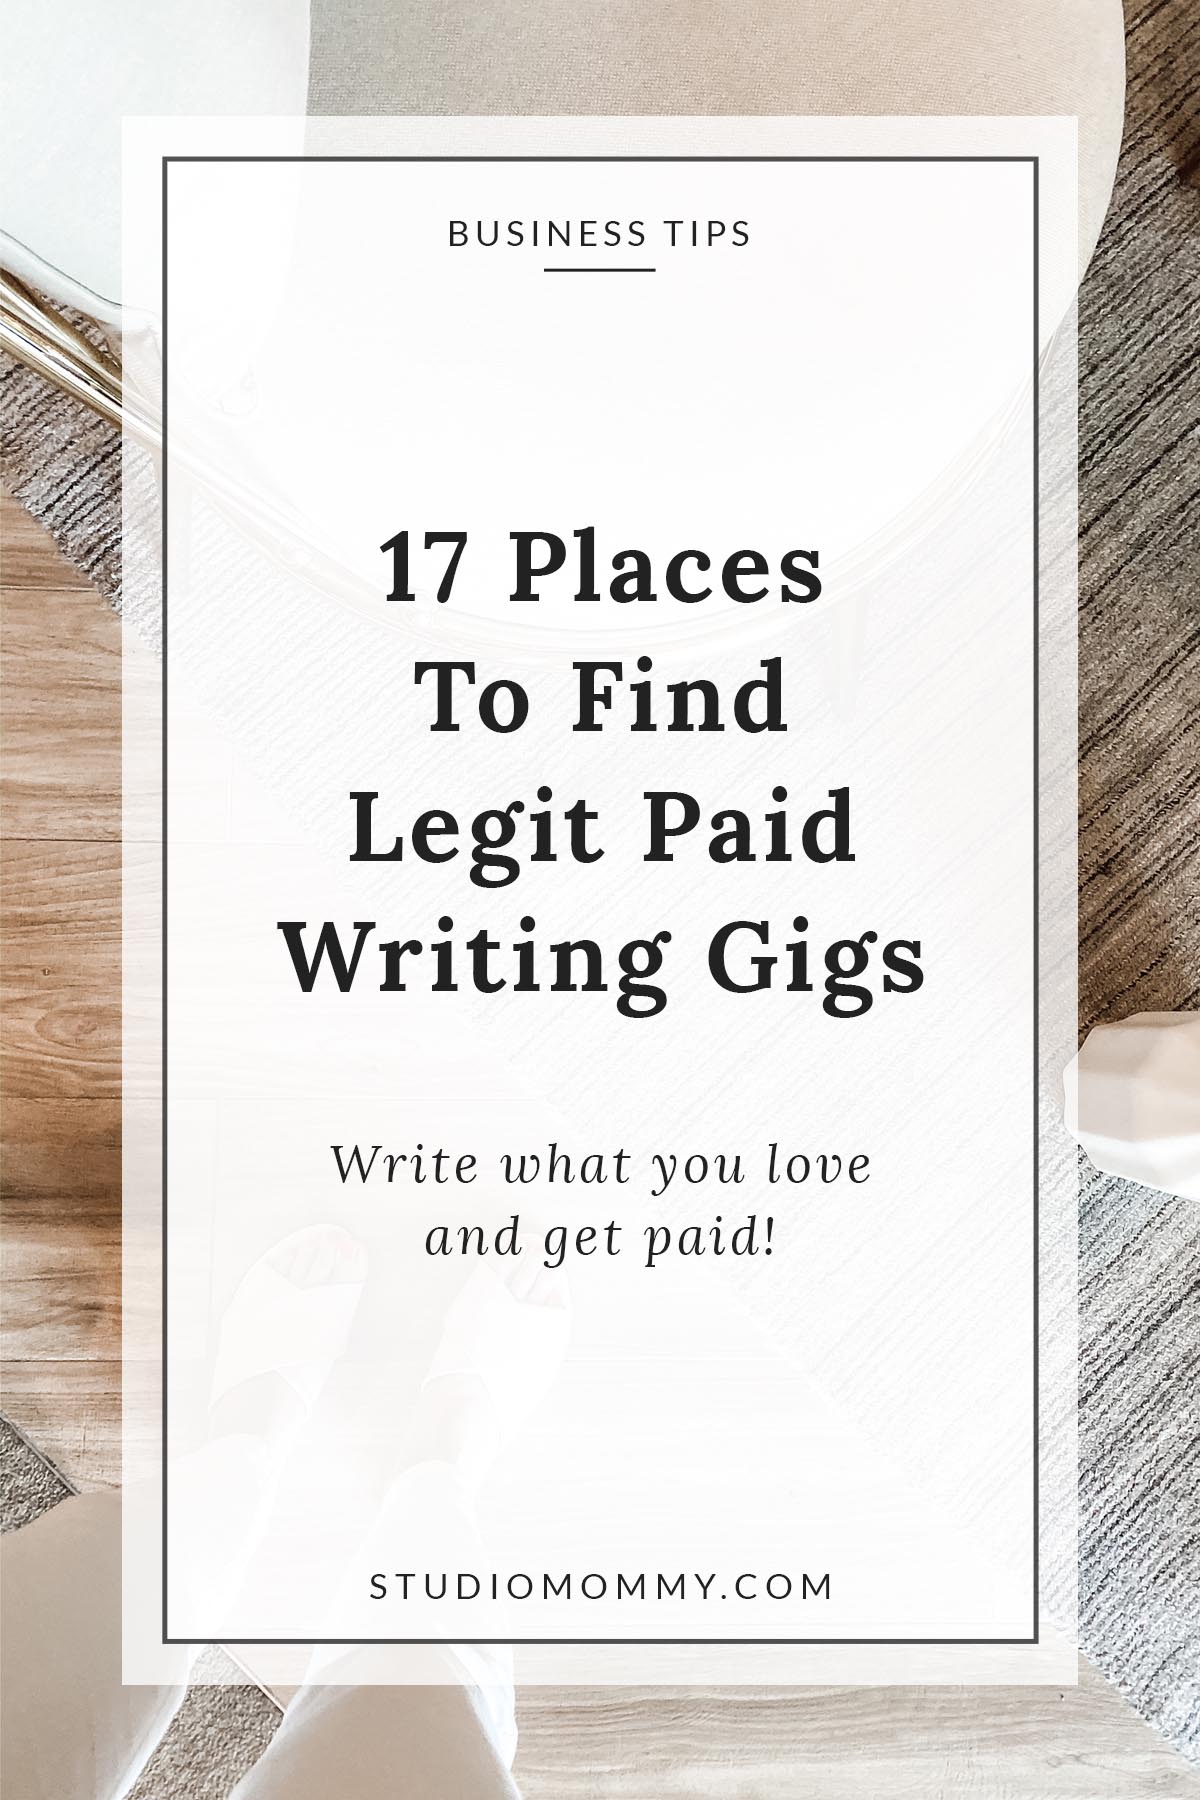 17 Places to Find Legit Paid Writing Gigs